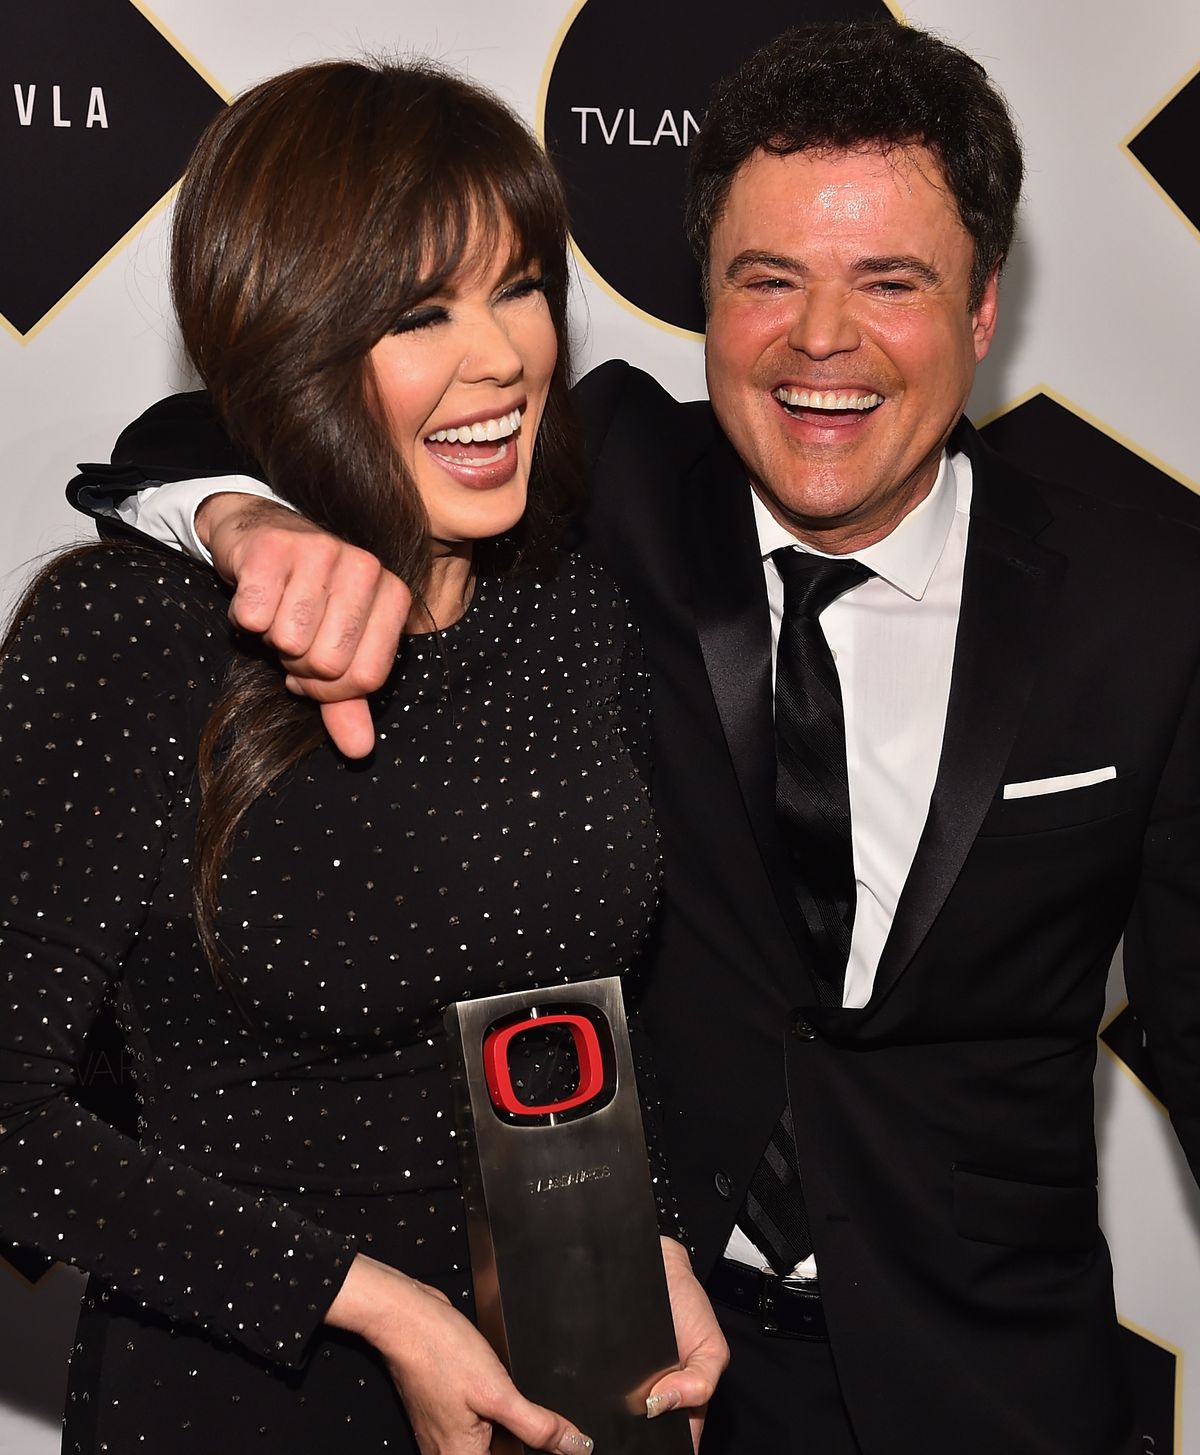 Singers Marie Osmond and Donny Osmond pose backstage with the Pop Culture Award at the 2015 TV Land Awards at Saban Theatre on April 11, 2015 | Photo: Getty Images